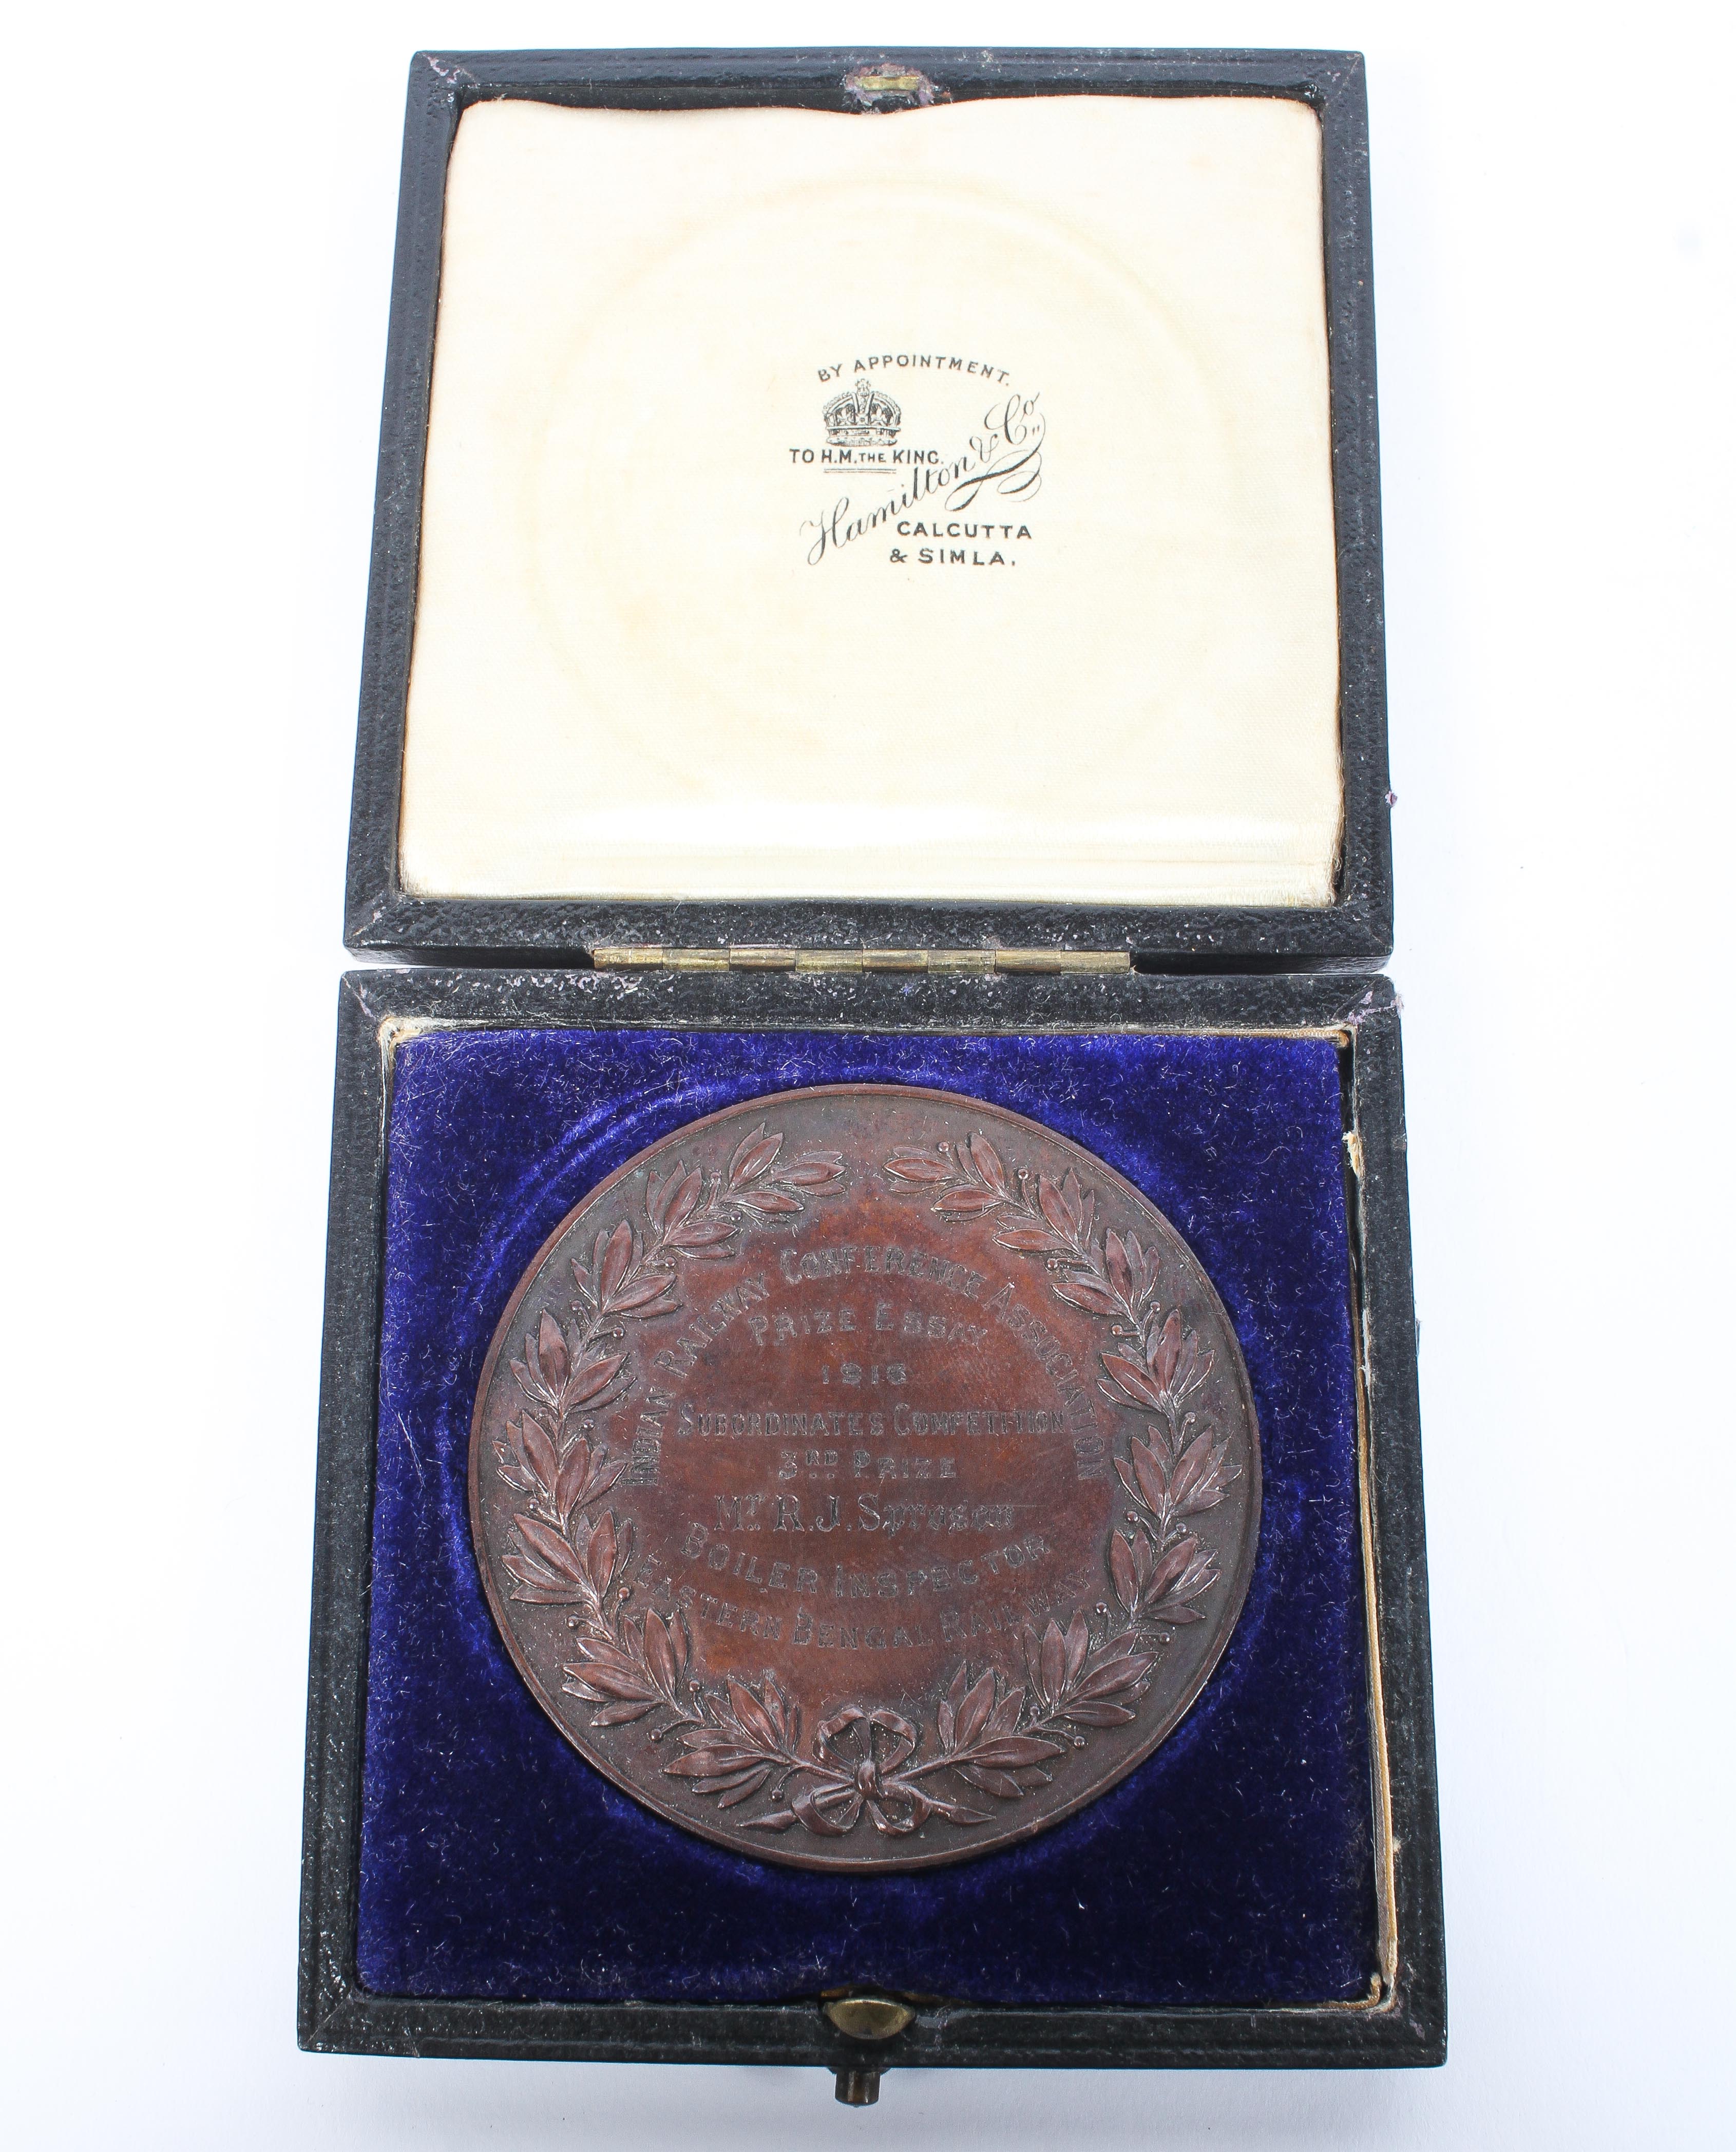 A bronze 3rd place medal struck for Indian Railway Conference Association. - Image 3 of 4